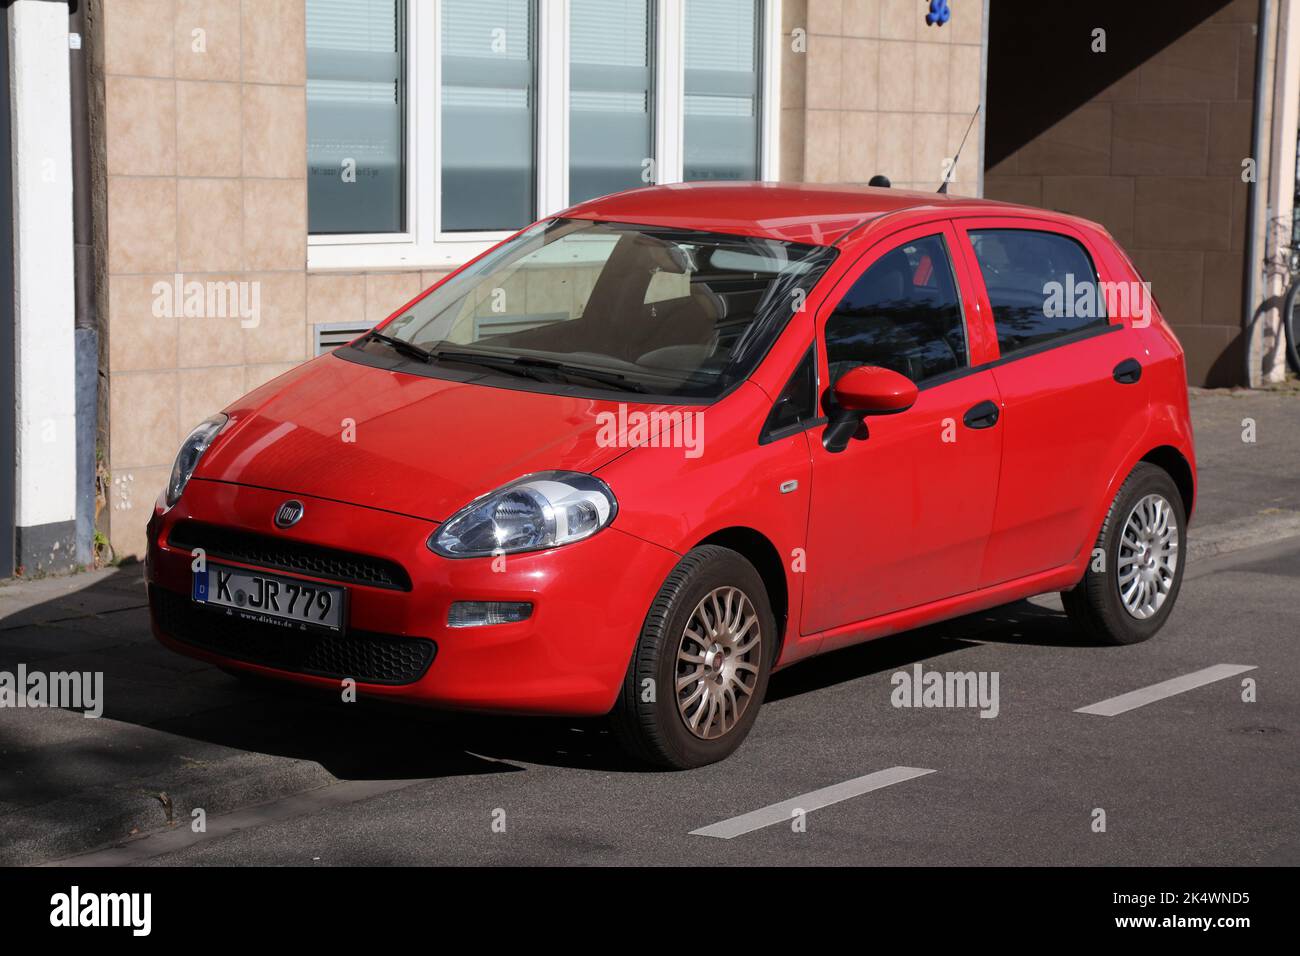 COLOGNE, GERMANY - SEPTEMBER 22, 2020: Fiat Grande Punto hatchback city car parked in Germany. There were 45.8 million cars registered in Germany (as Stock Photo